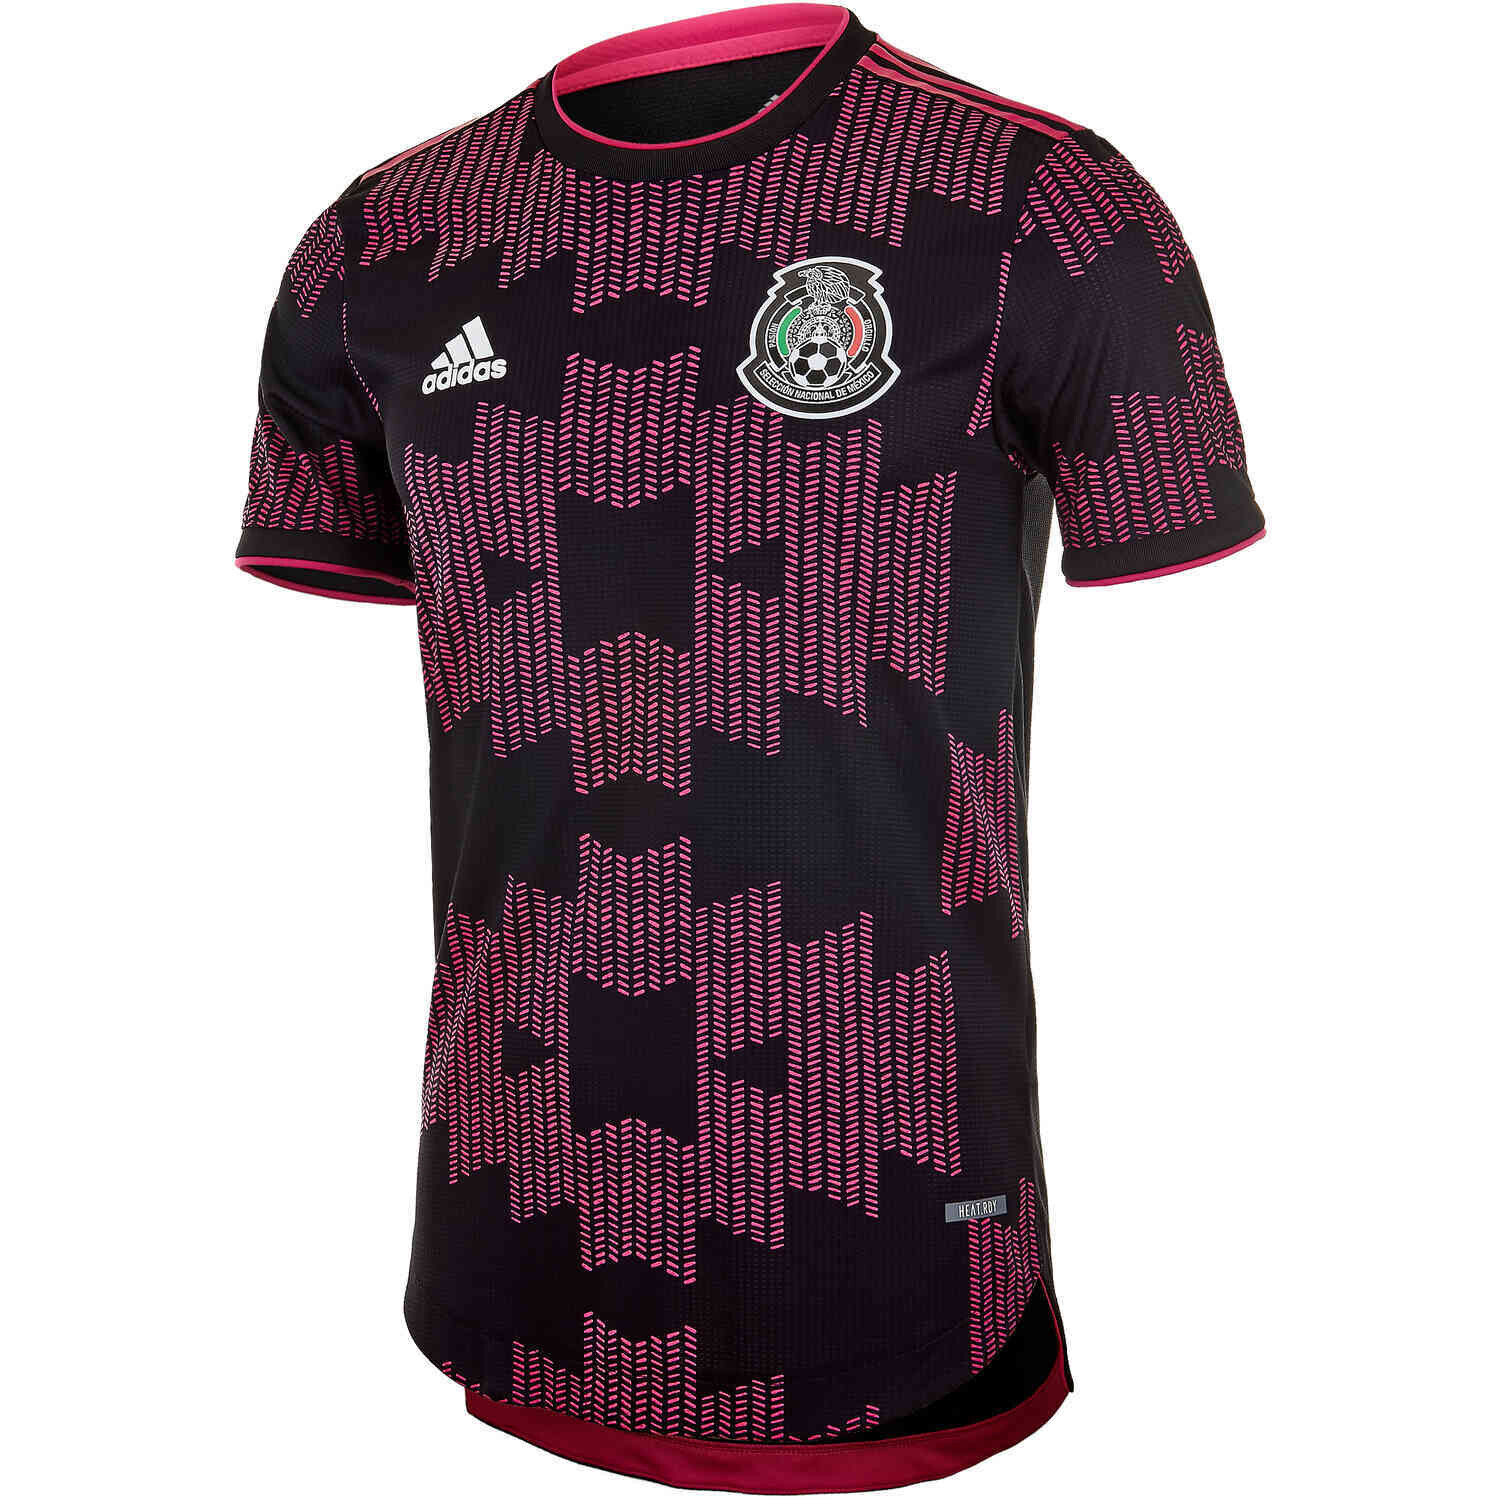 Adidas Mexico Official Home Jersey Shirt 2021 (Authentic)